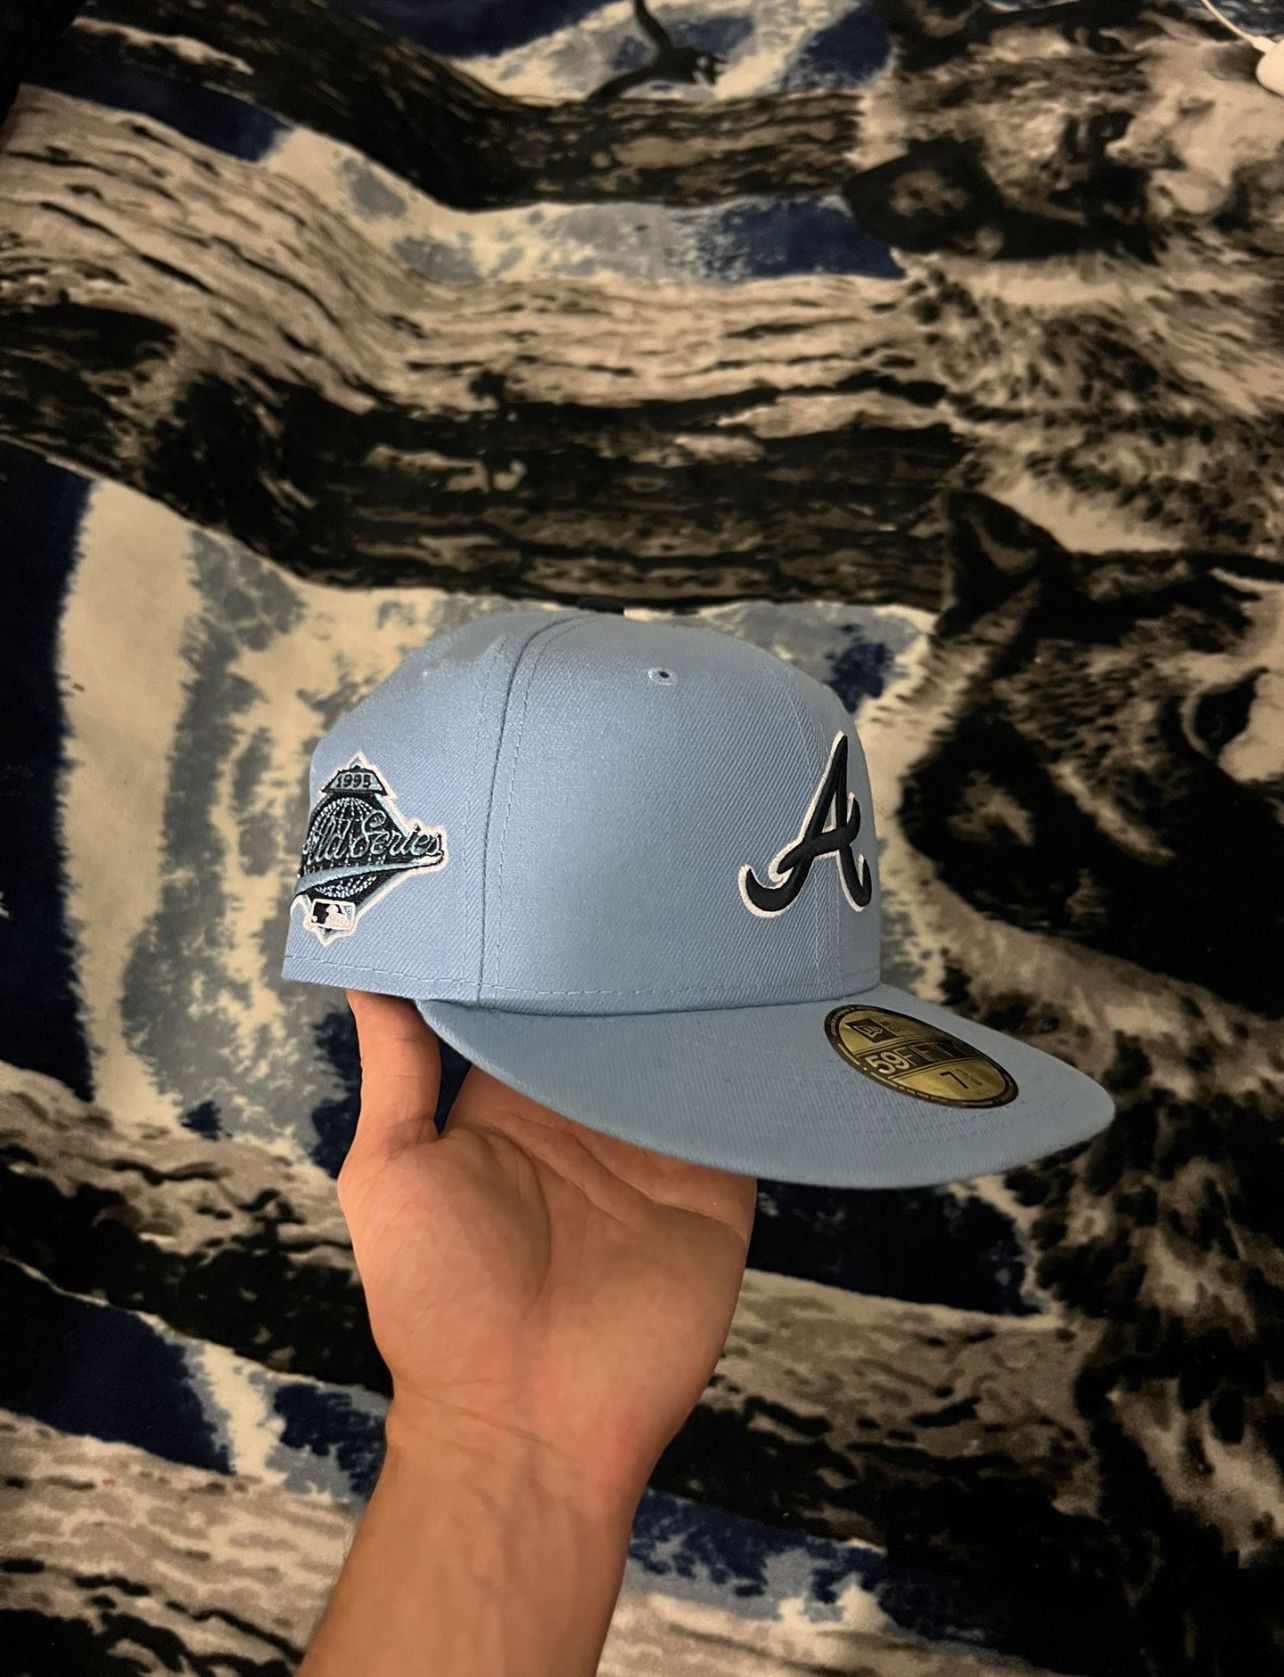 Atl Braves Hat for Sale in Antioch, CA - OfferUp